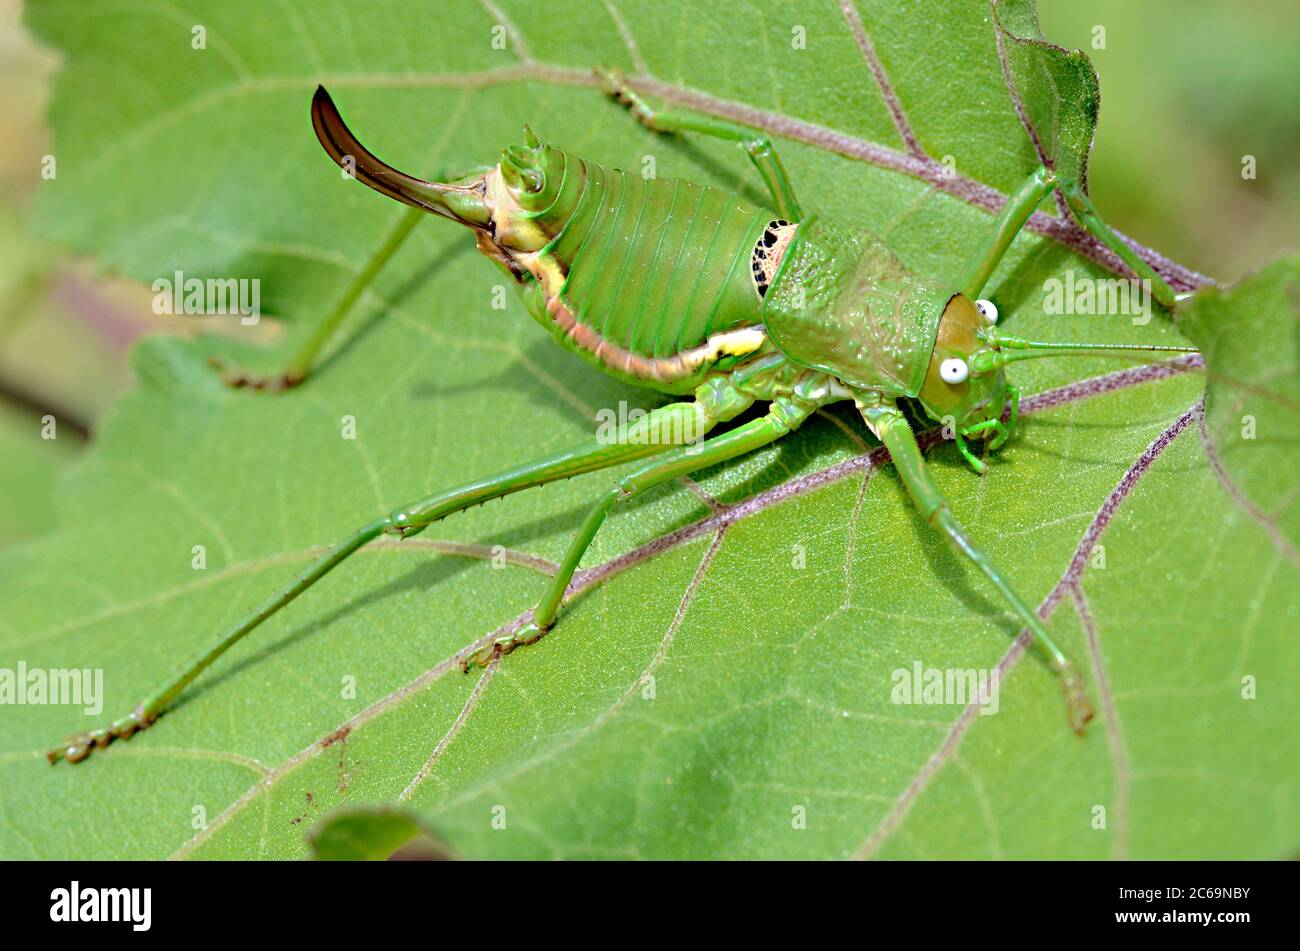 Macro of green female grasshopper of the ephippigera genus on leaf, seen from above Stock Photo